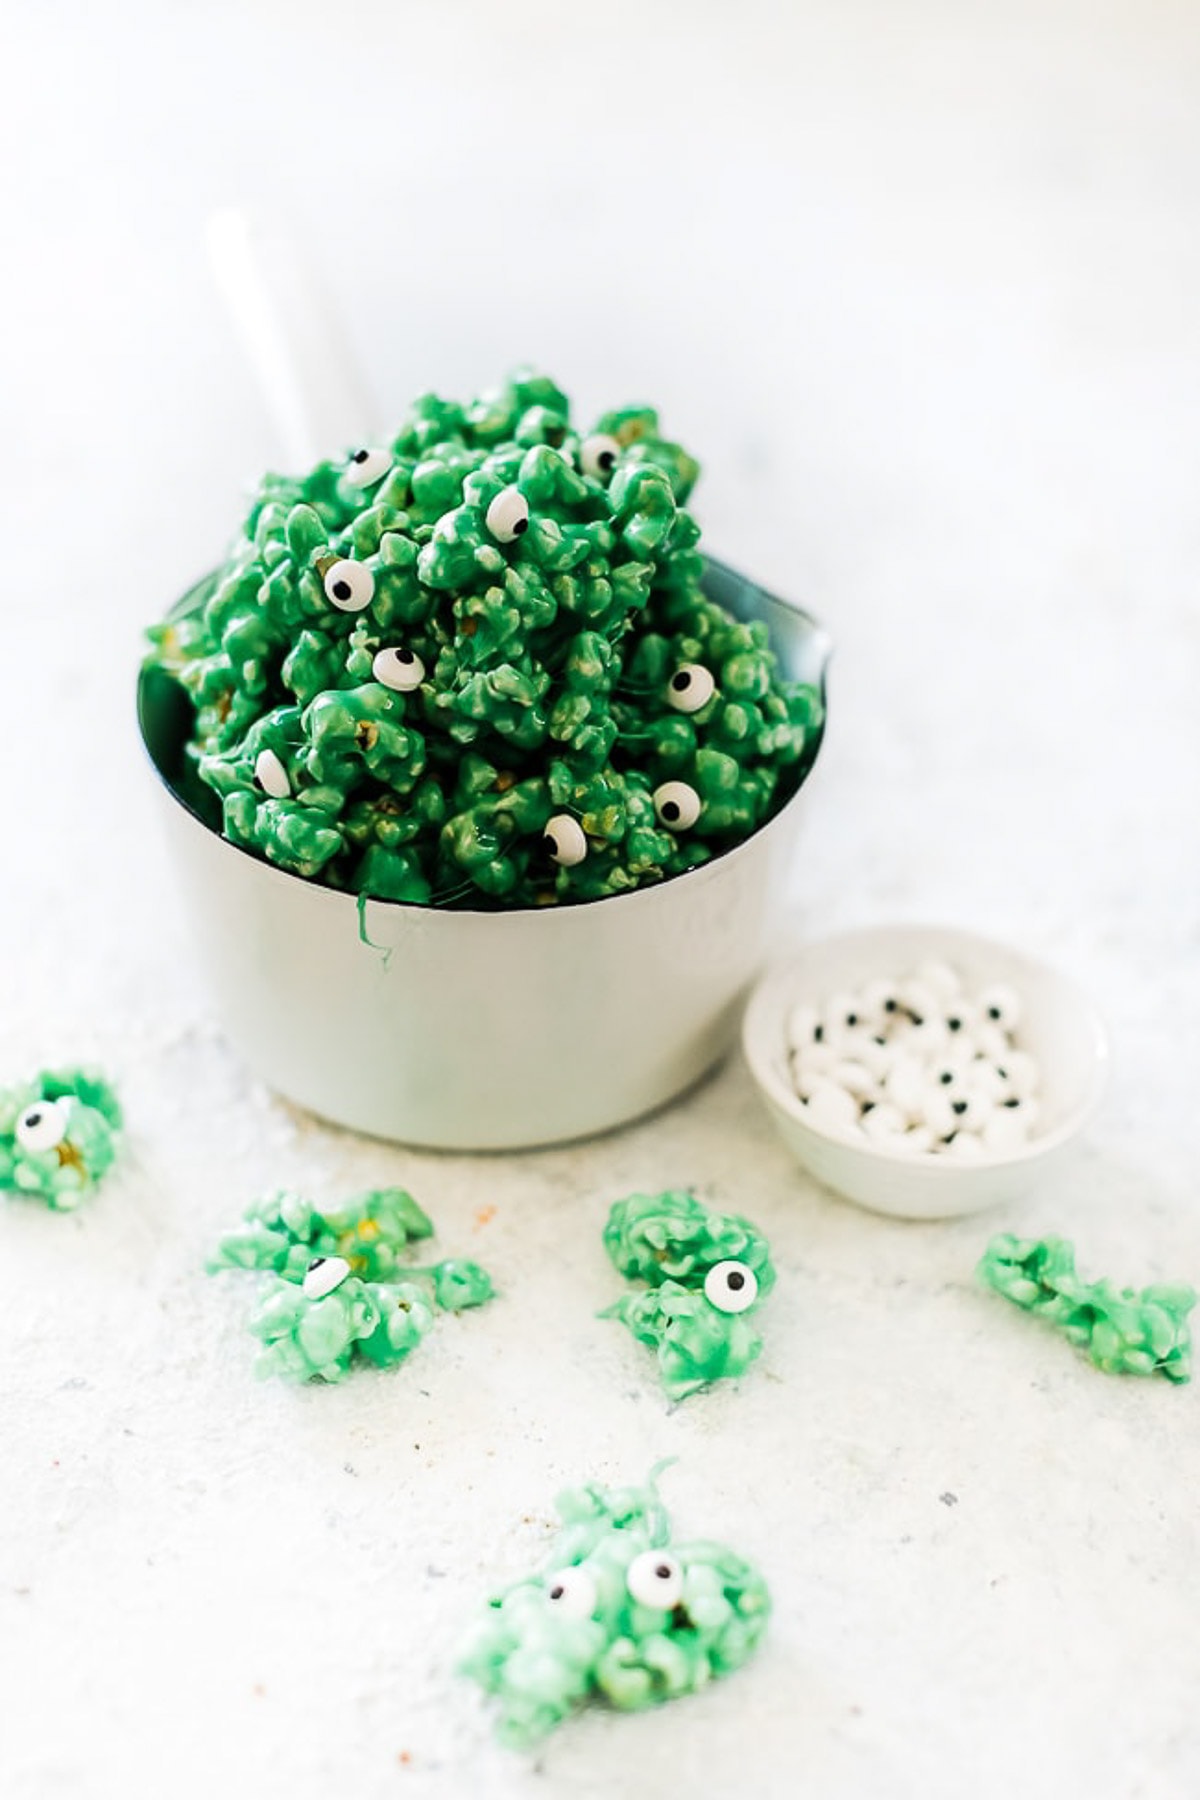 Green halloween popcorn in a white saucepan surrounded by popcorn.